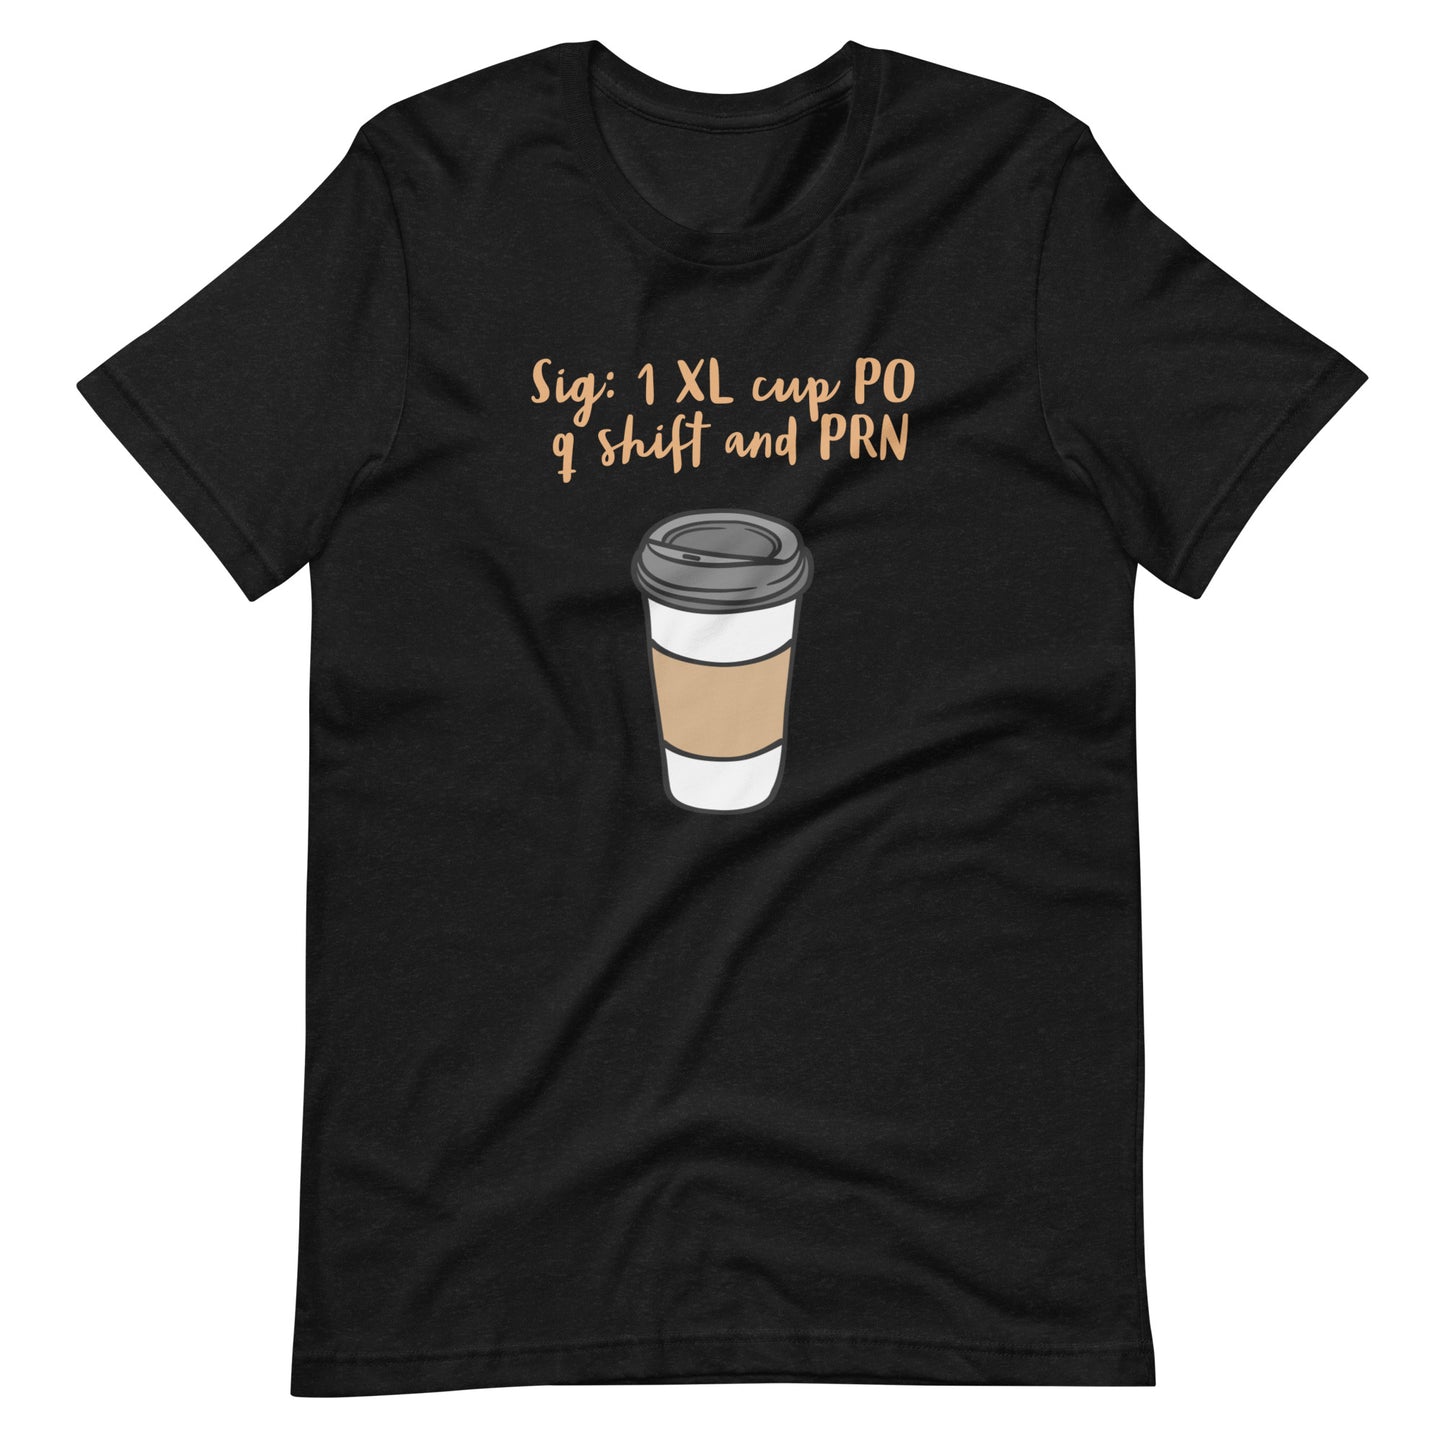 Graphic Tee, Coffee, Funny Doctor Shirt, Medical Student, Funny Nurse Shirt, Funny Resident Shirt, Doctor, Physician, Resident, Nurse, PA, NP, Medical Student